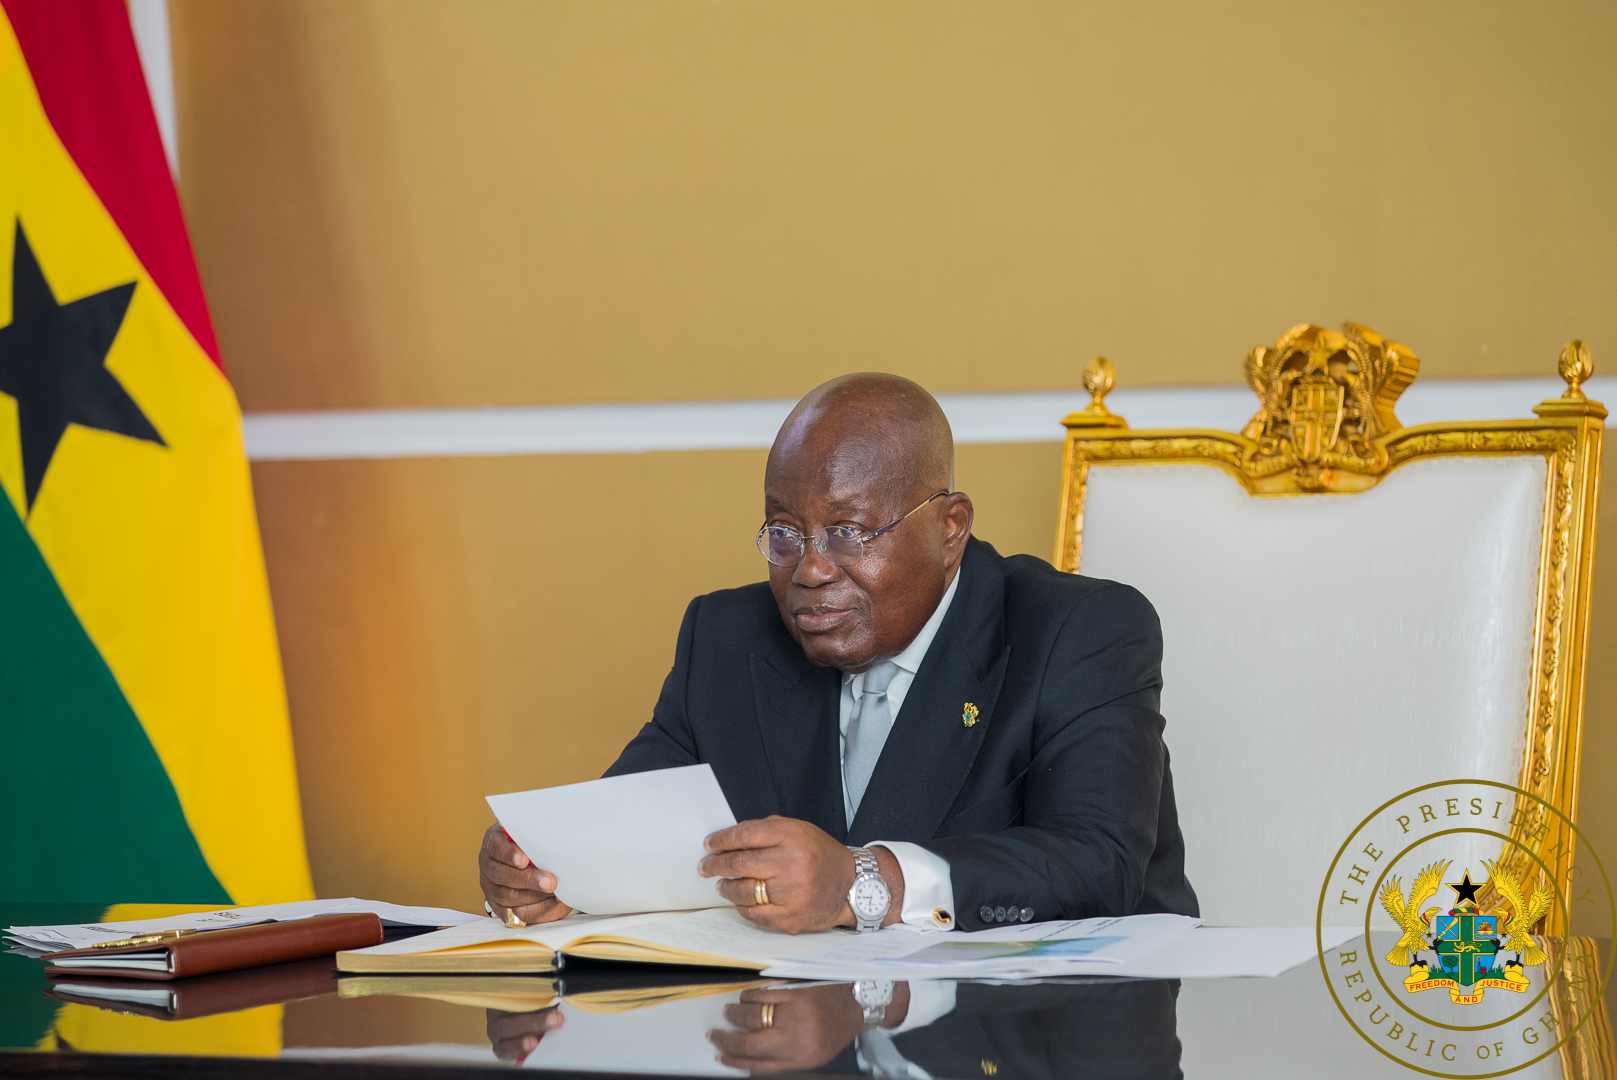 President Akufo-Addo in Netherlands for working visit